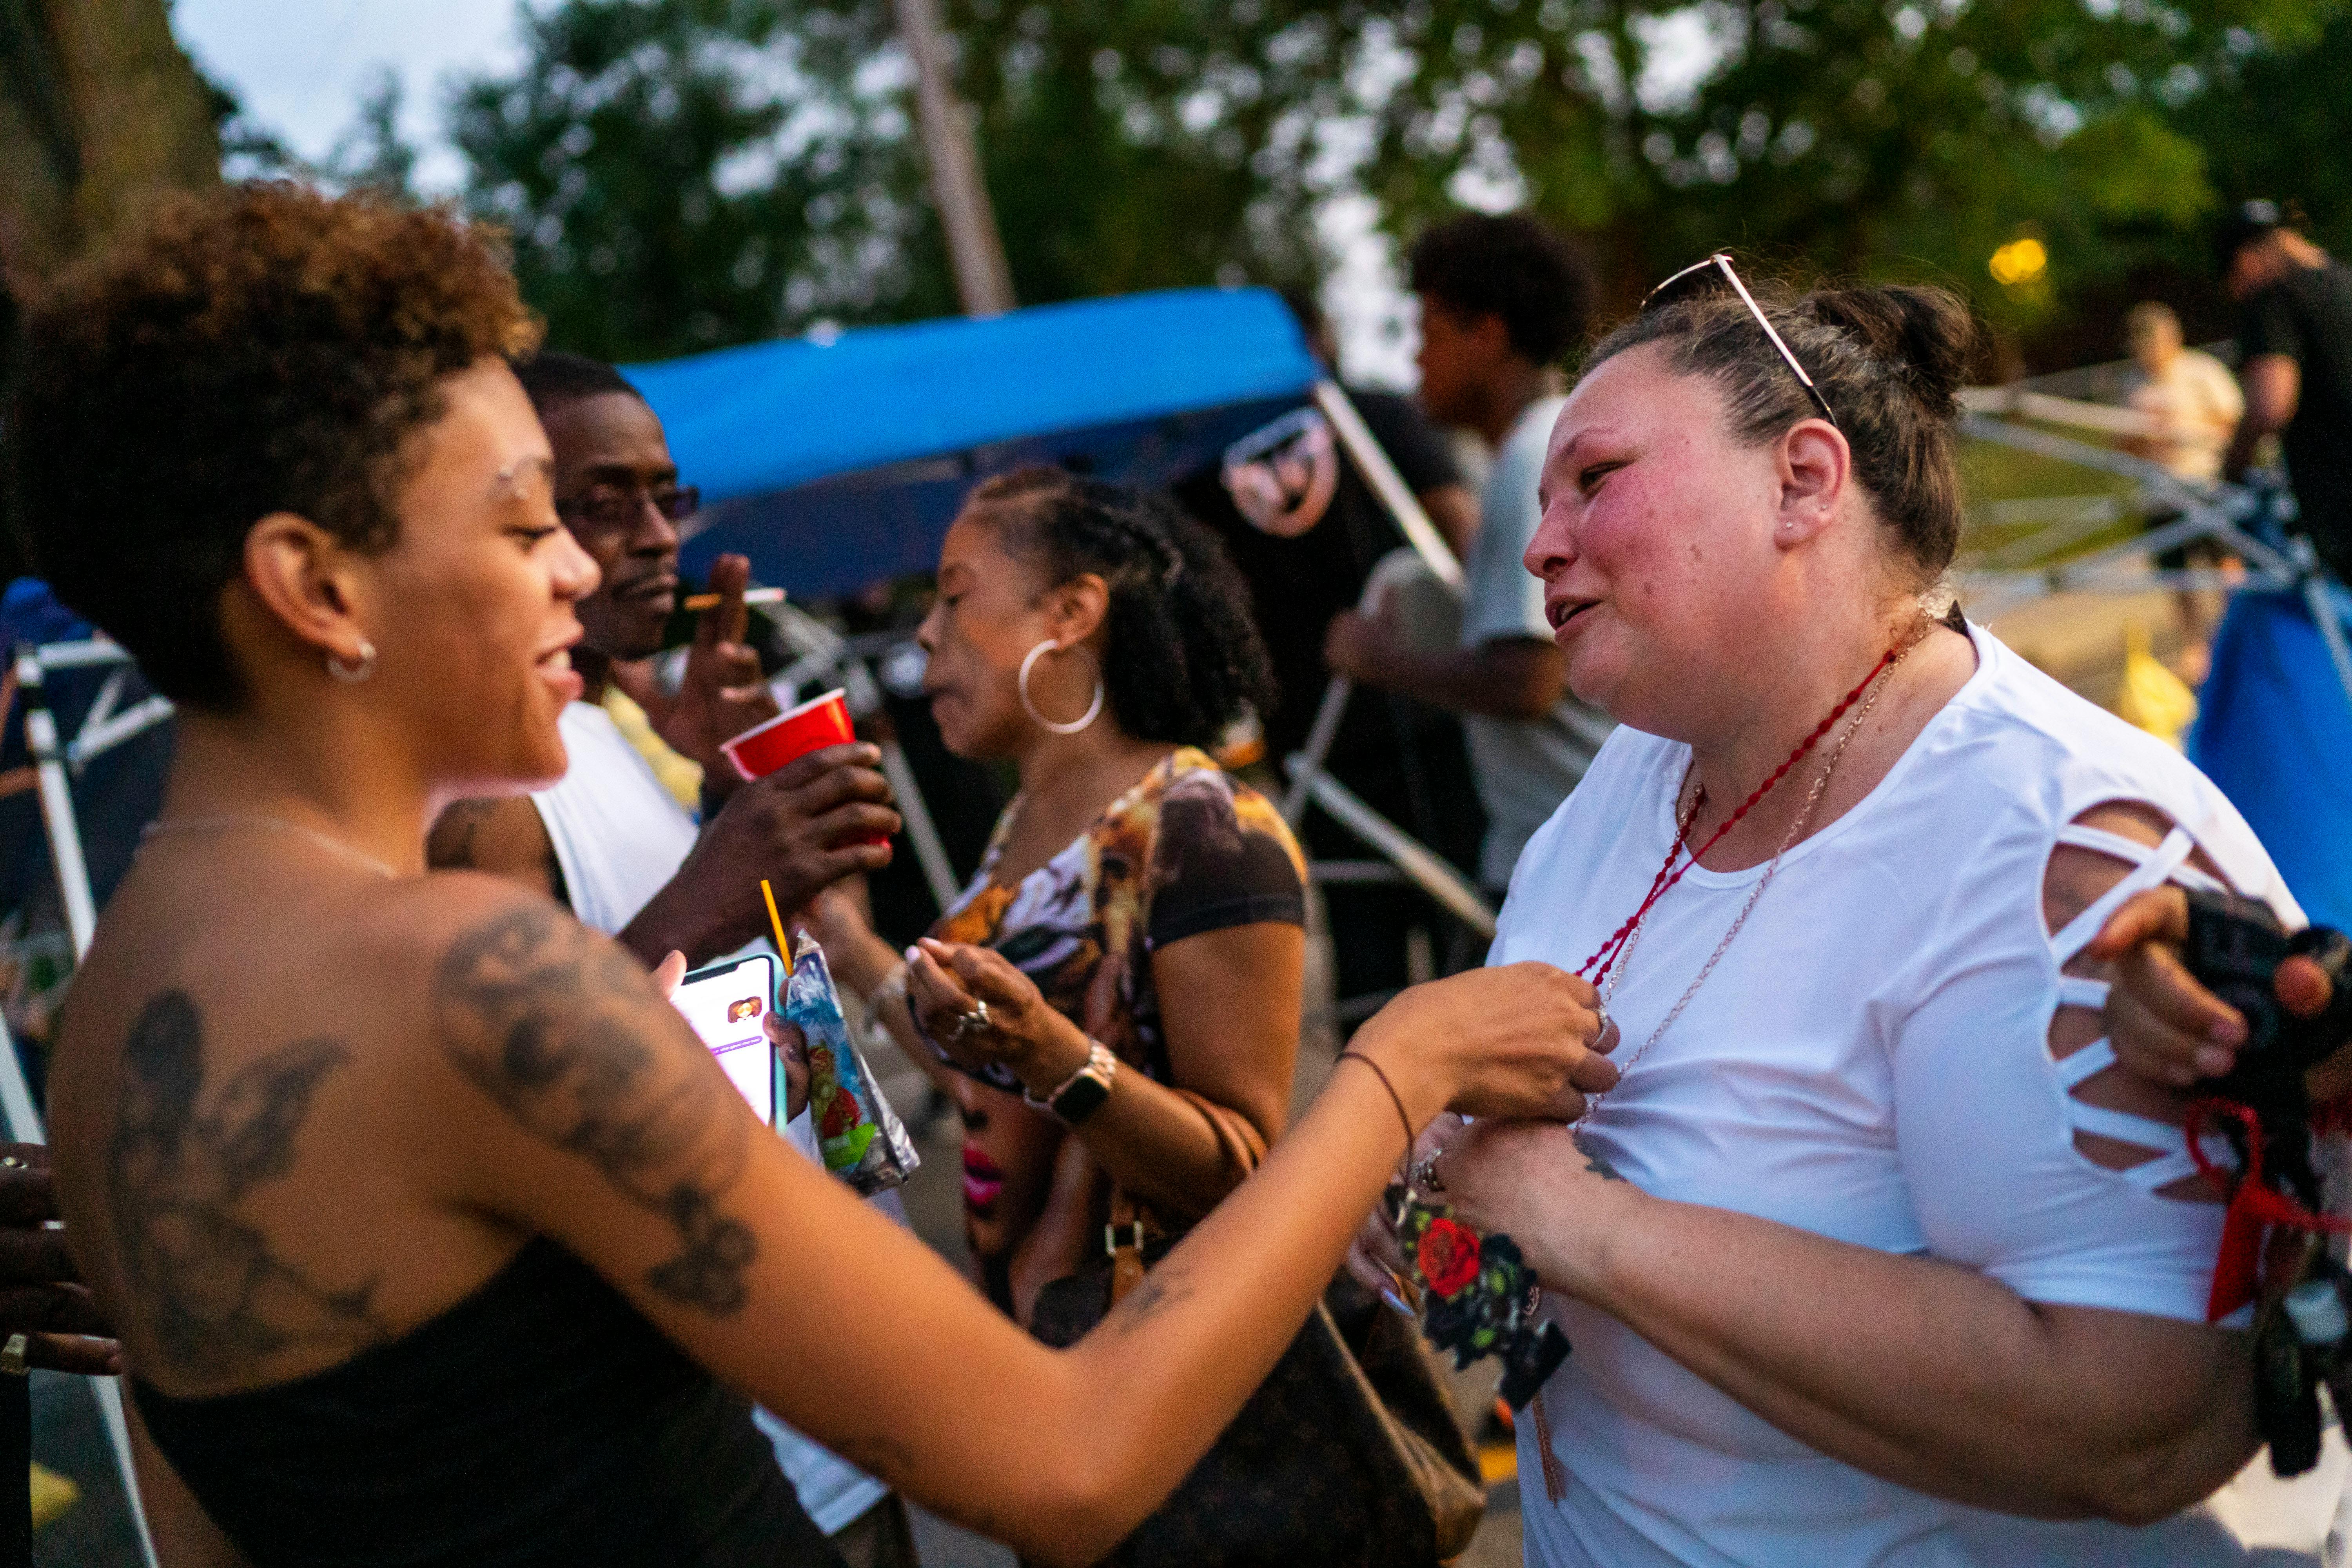 Alayna Albrecht-Payton, Daunte Wright's girlfriend, who was in the car when he was shot and died, spoke with Katie Wright at the July 4th celebration.